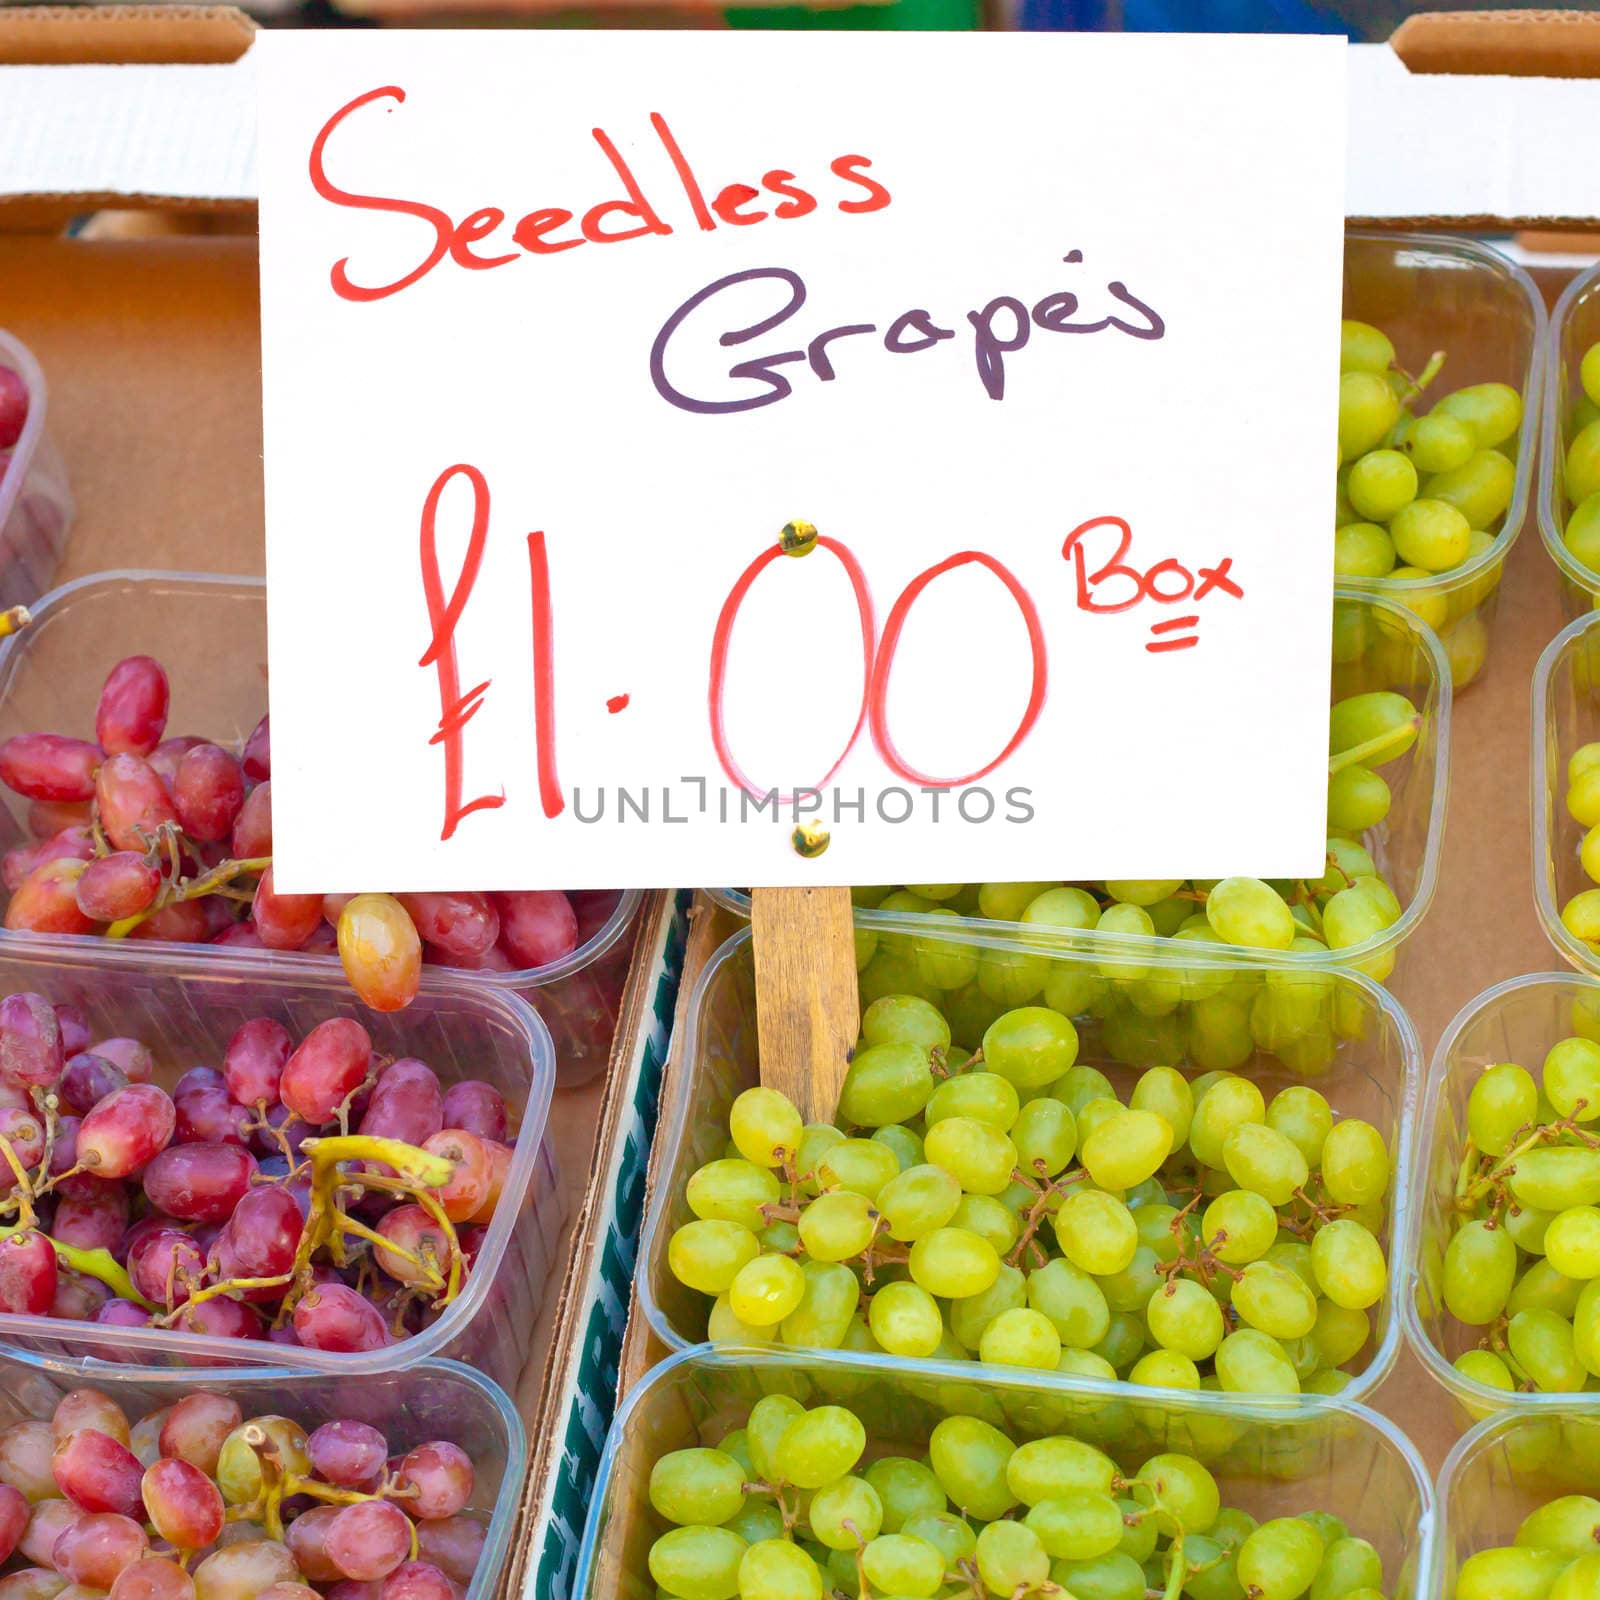 Punnets of red and white grapes for sale at a UK market stall